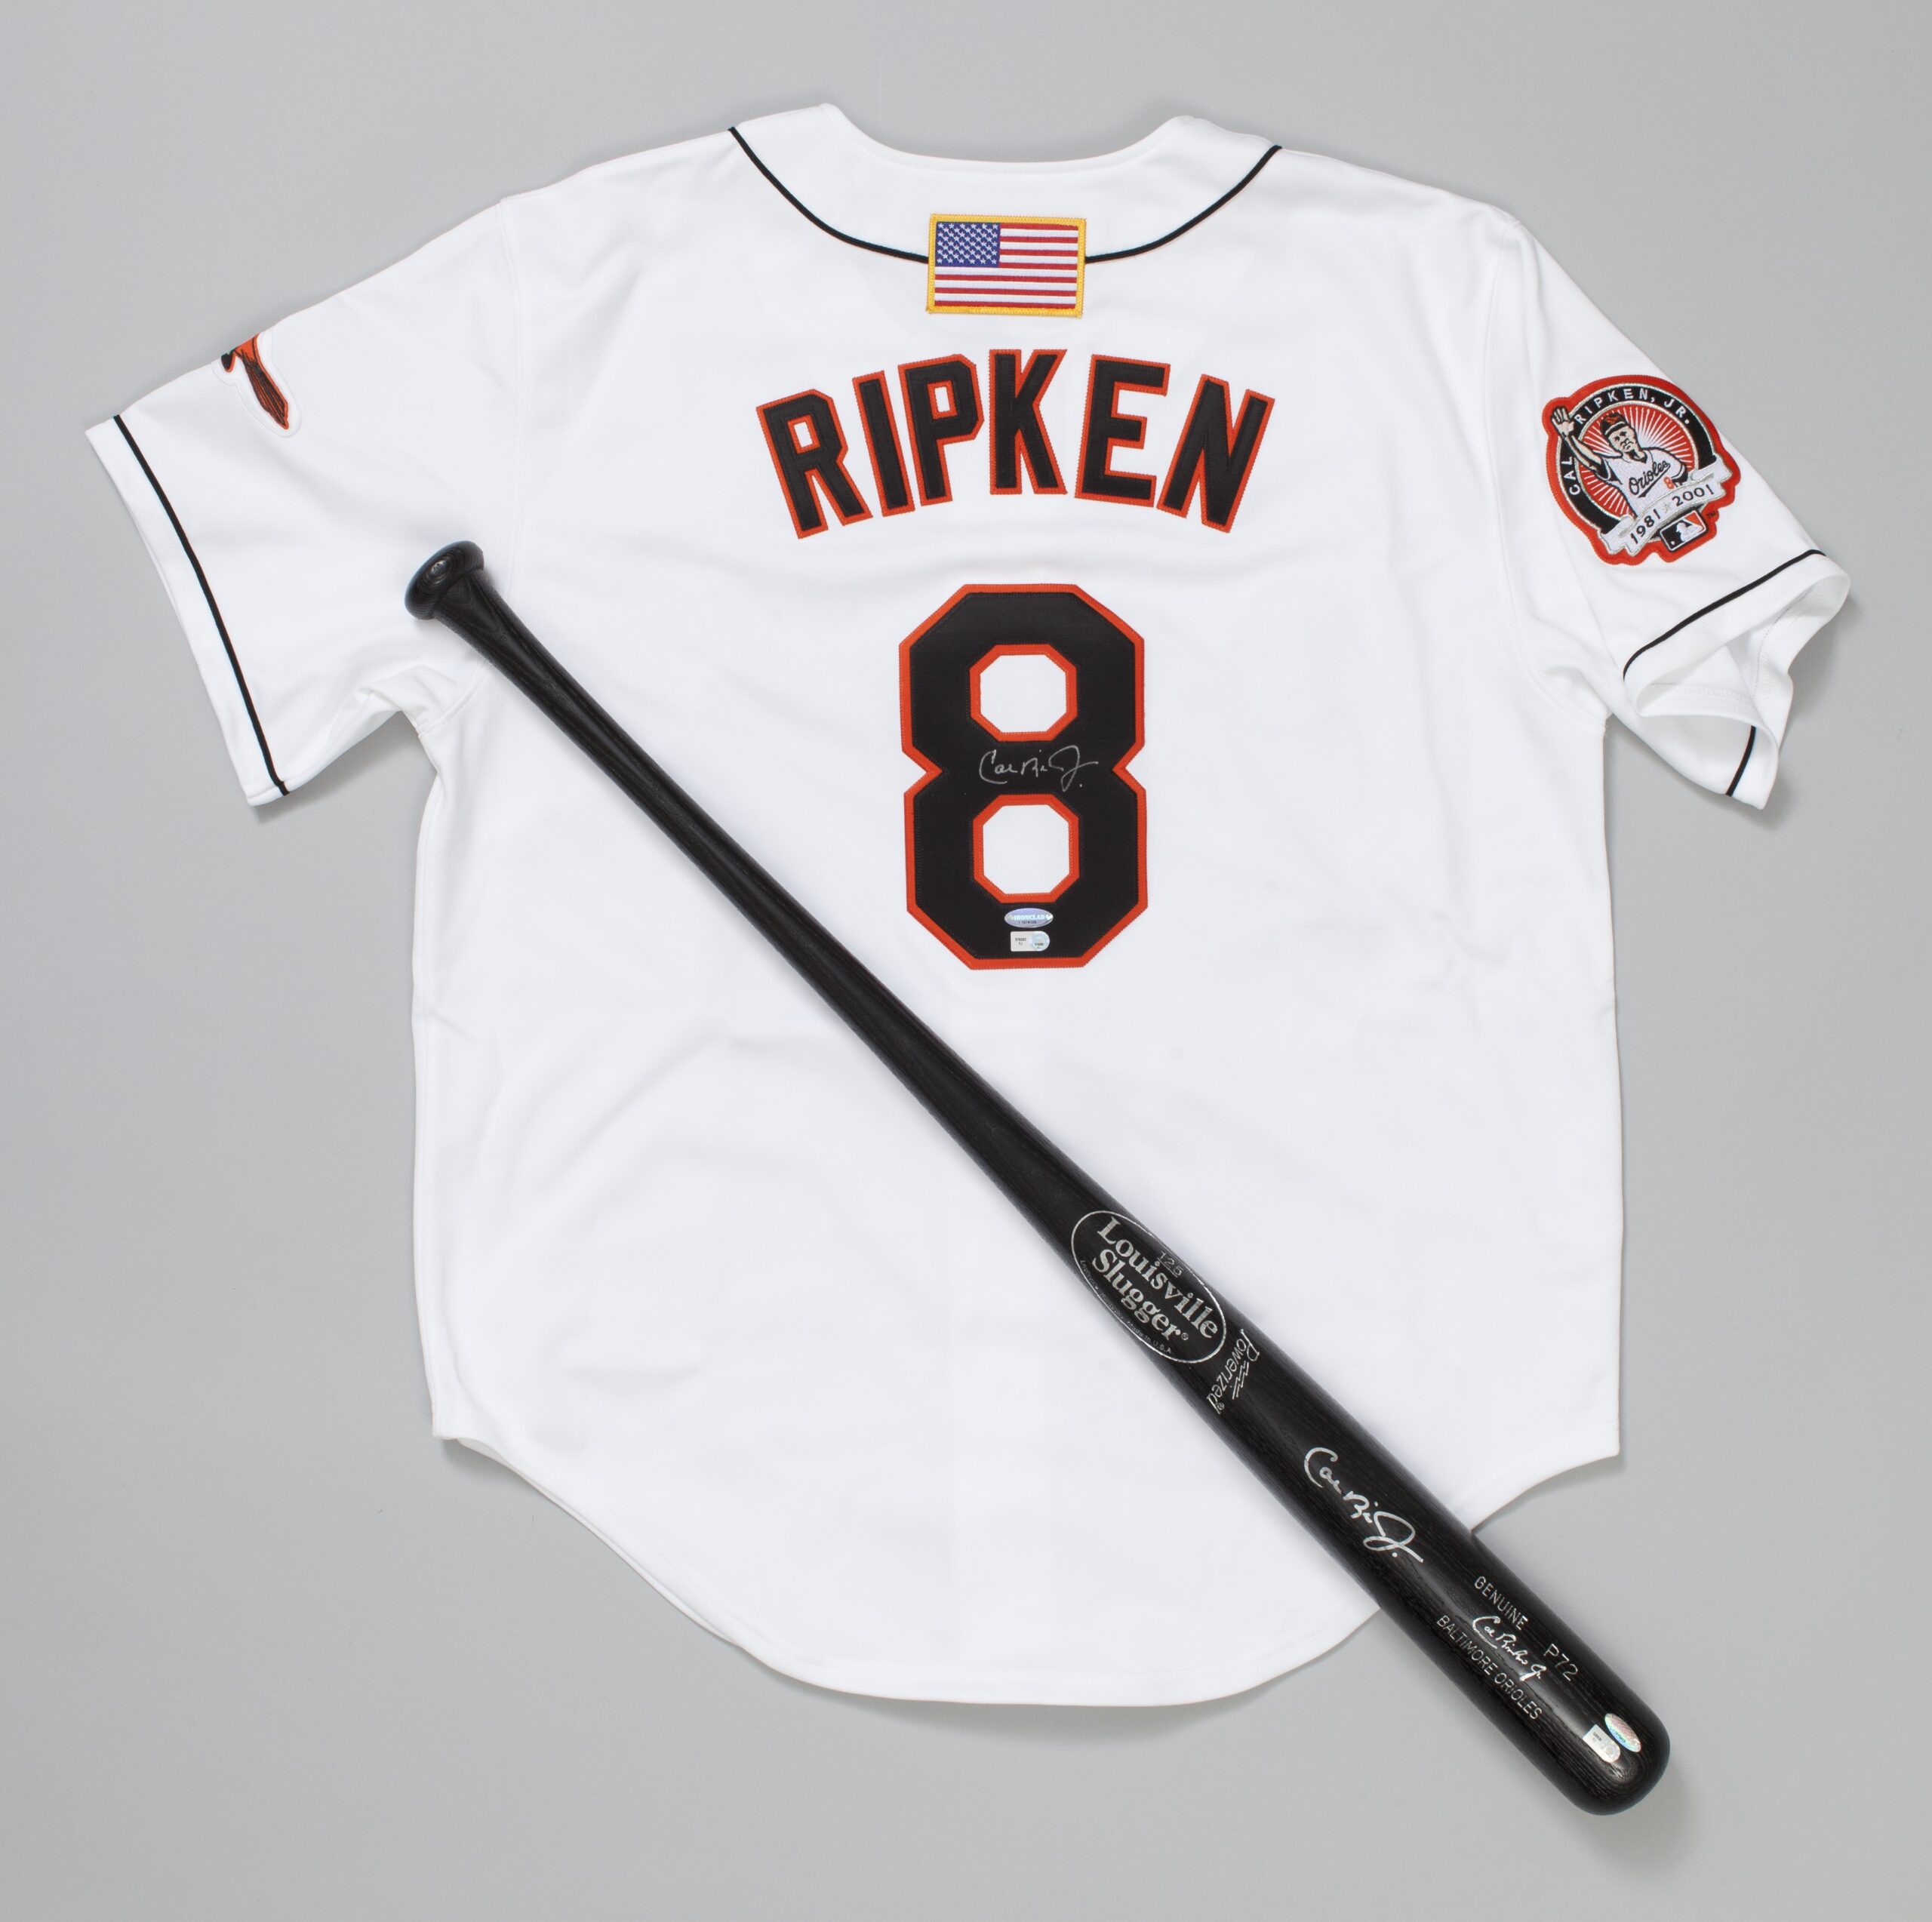 White baseball jersey with text displaying the name "Ripken" and a number 8. Black baseball bat laying on top of jersey. 